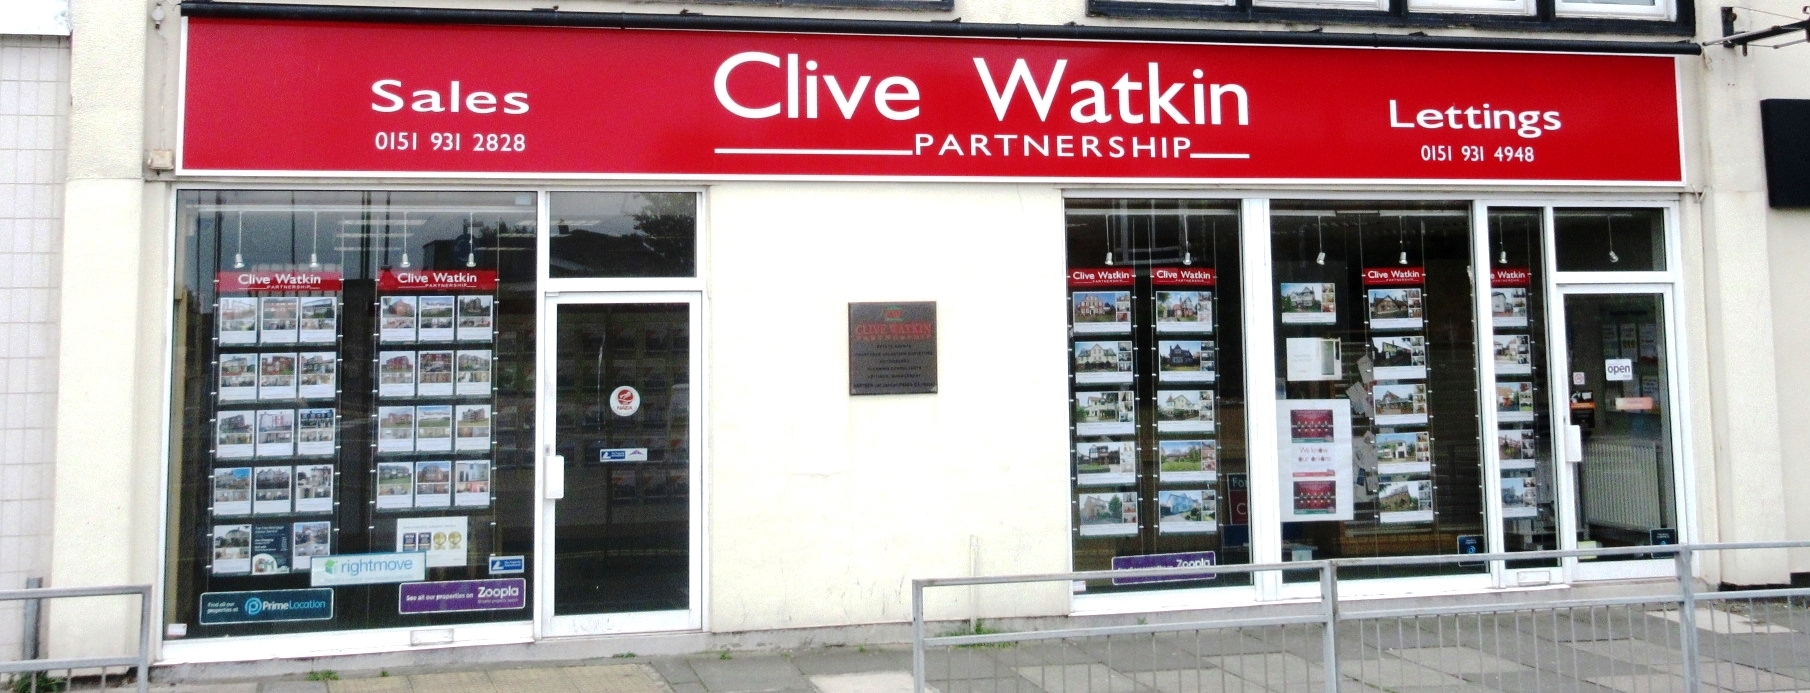 Images Clive Watkin Sales and Letting Agents Crosby